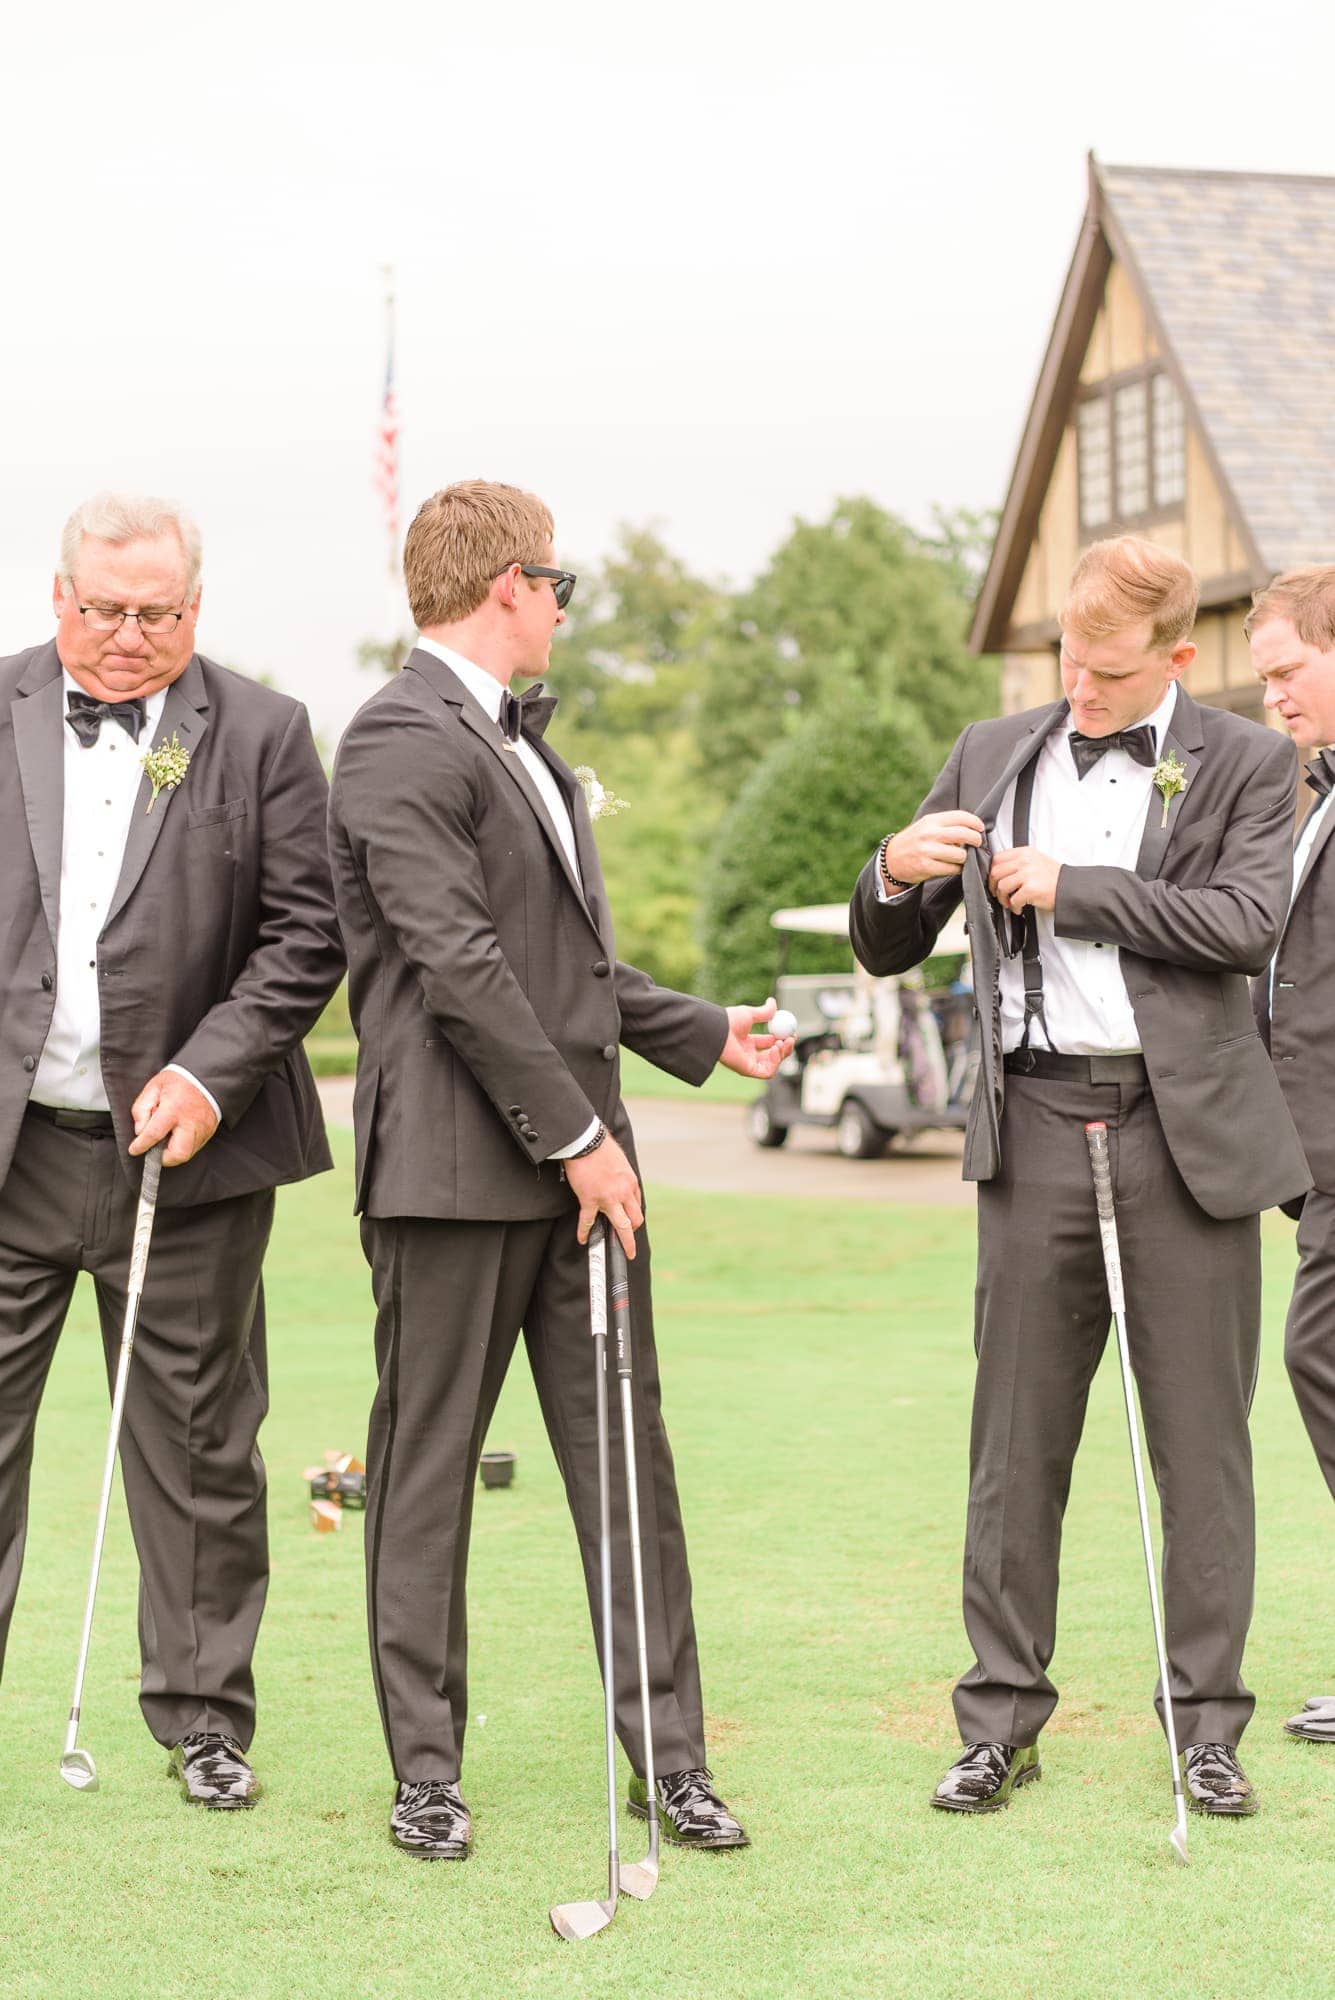 The groom practices his golf swings before his reception at the Longview Country Club in Charlotte starts.